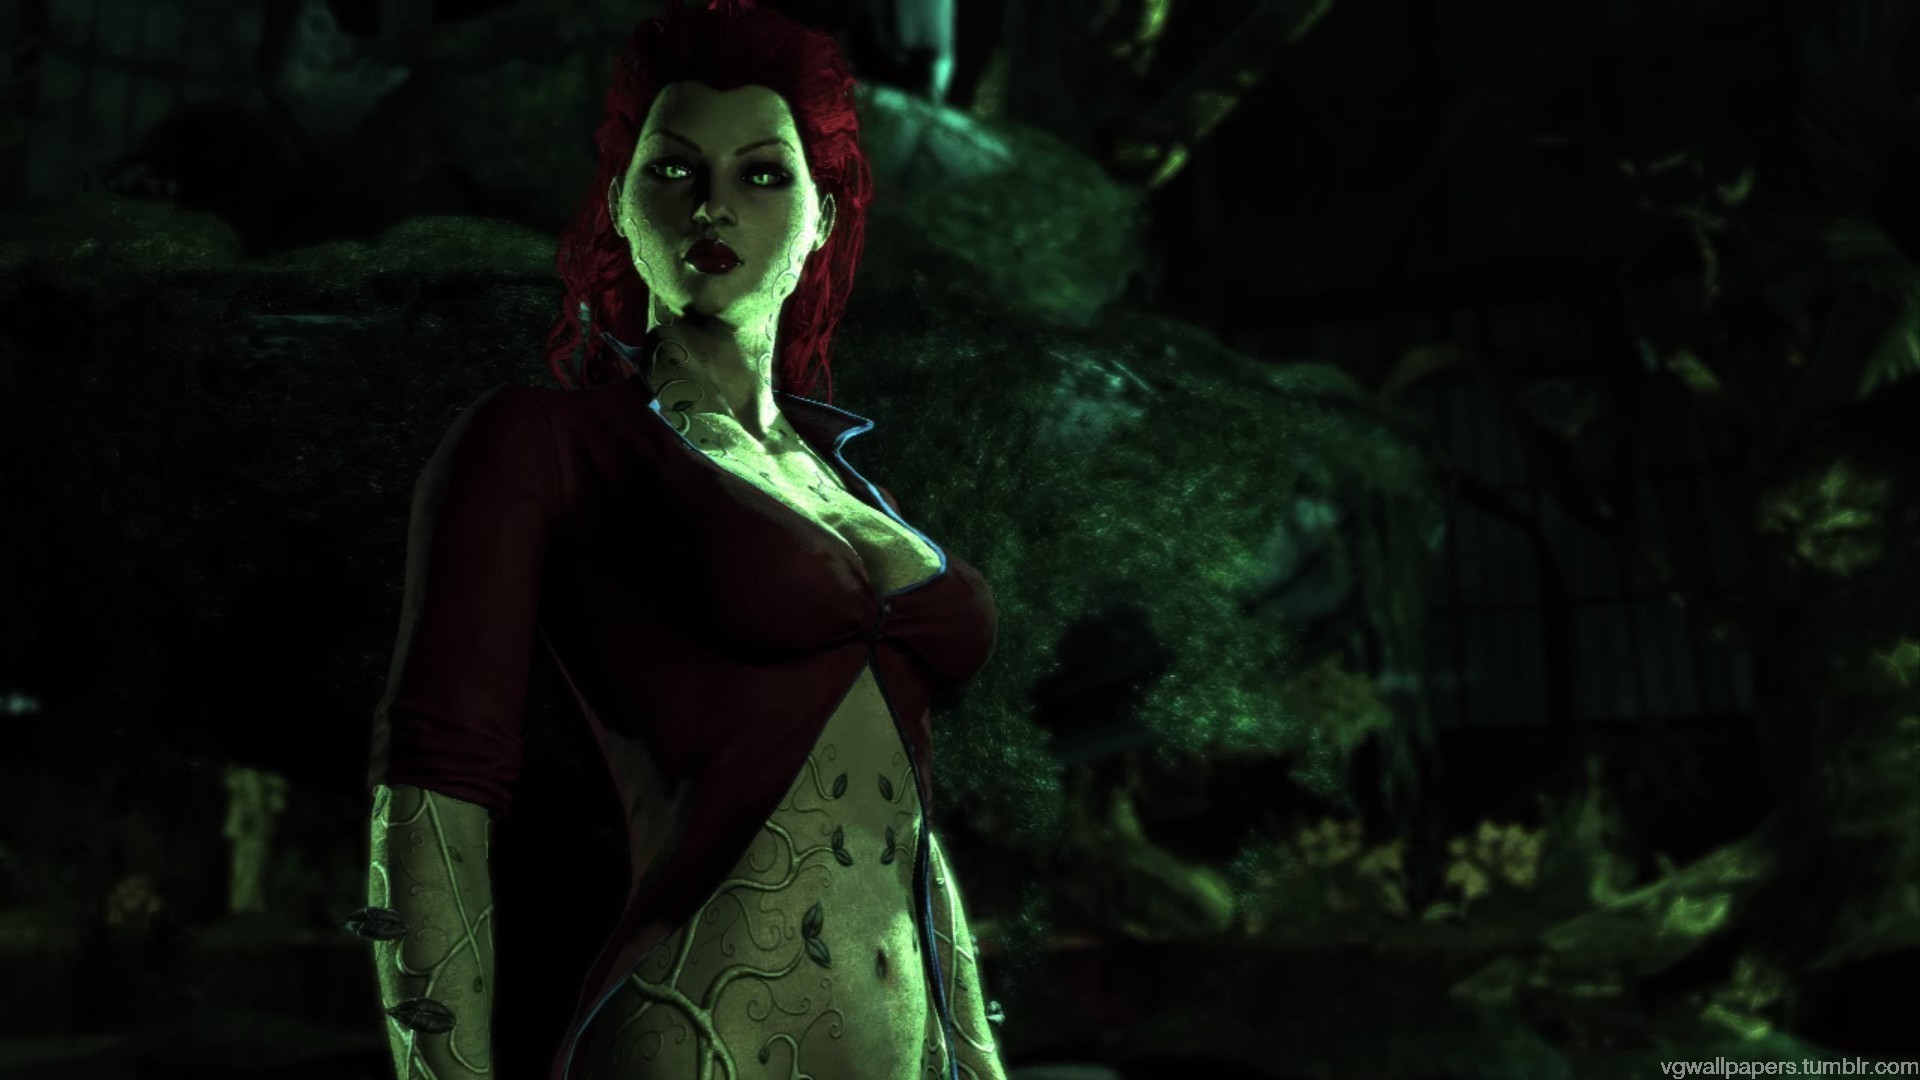 1920x1080 Poison Ivy - a screenshot from The Batman: Arkham Asylum Click image for  full 